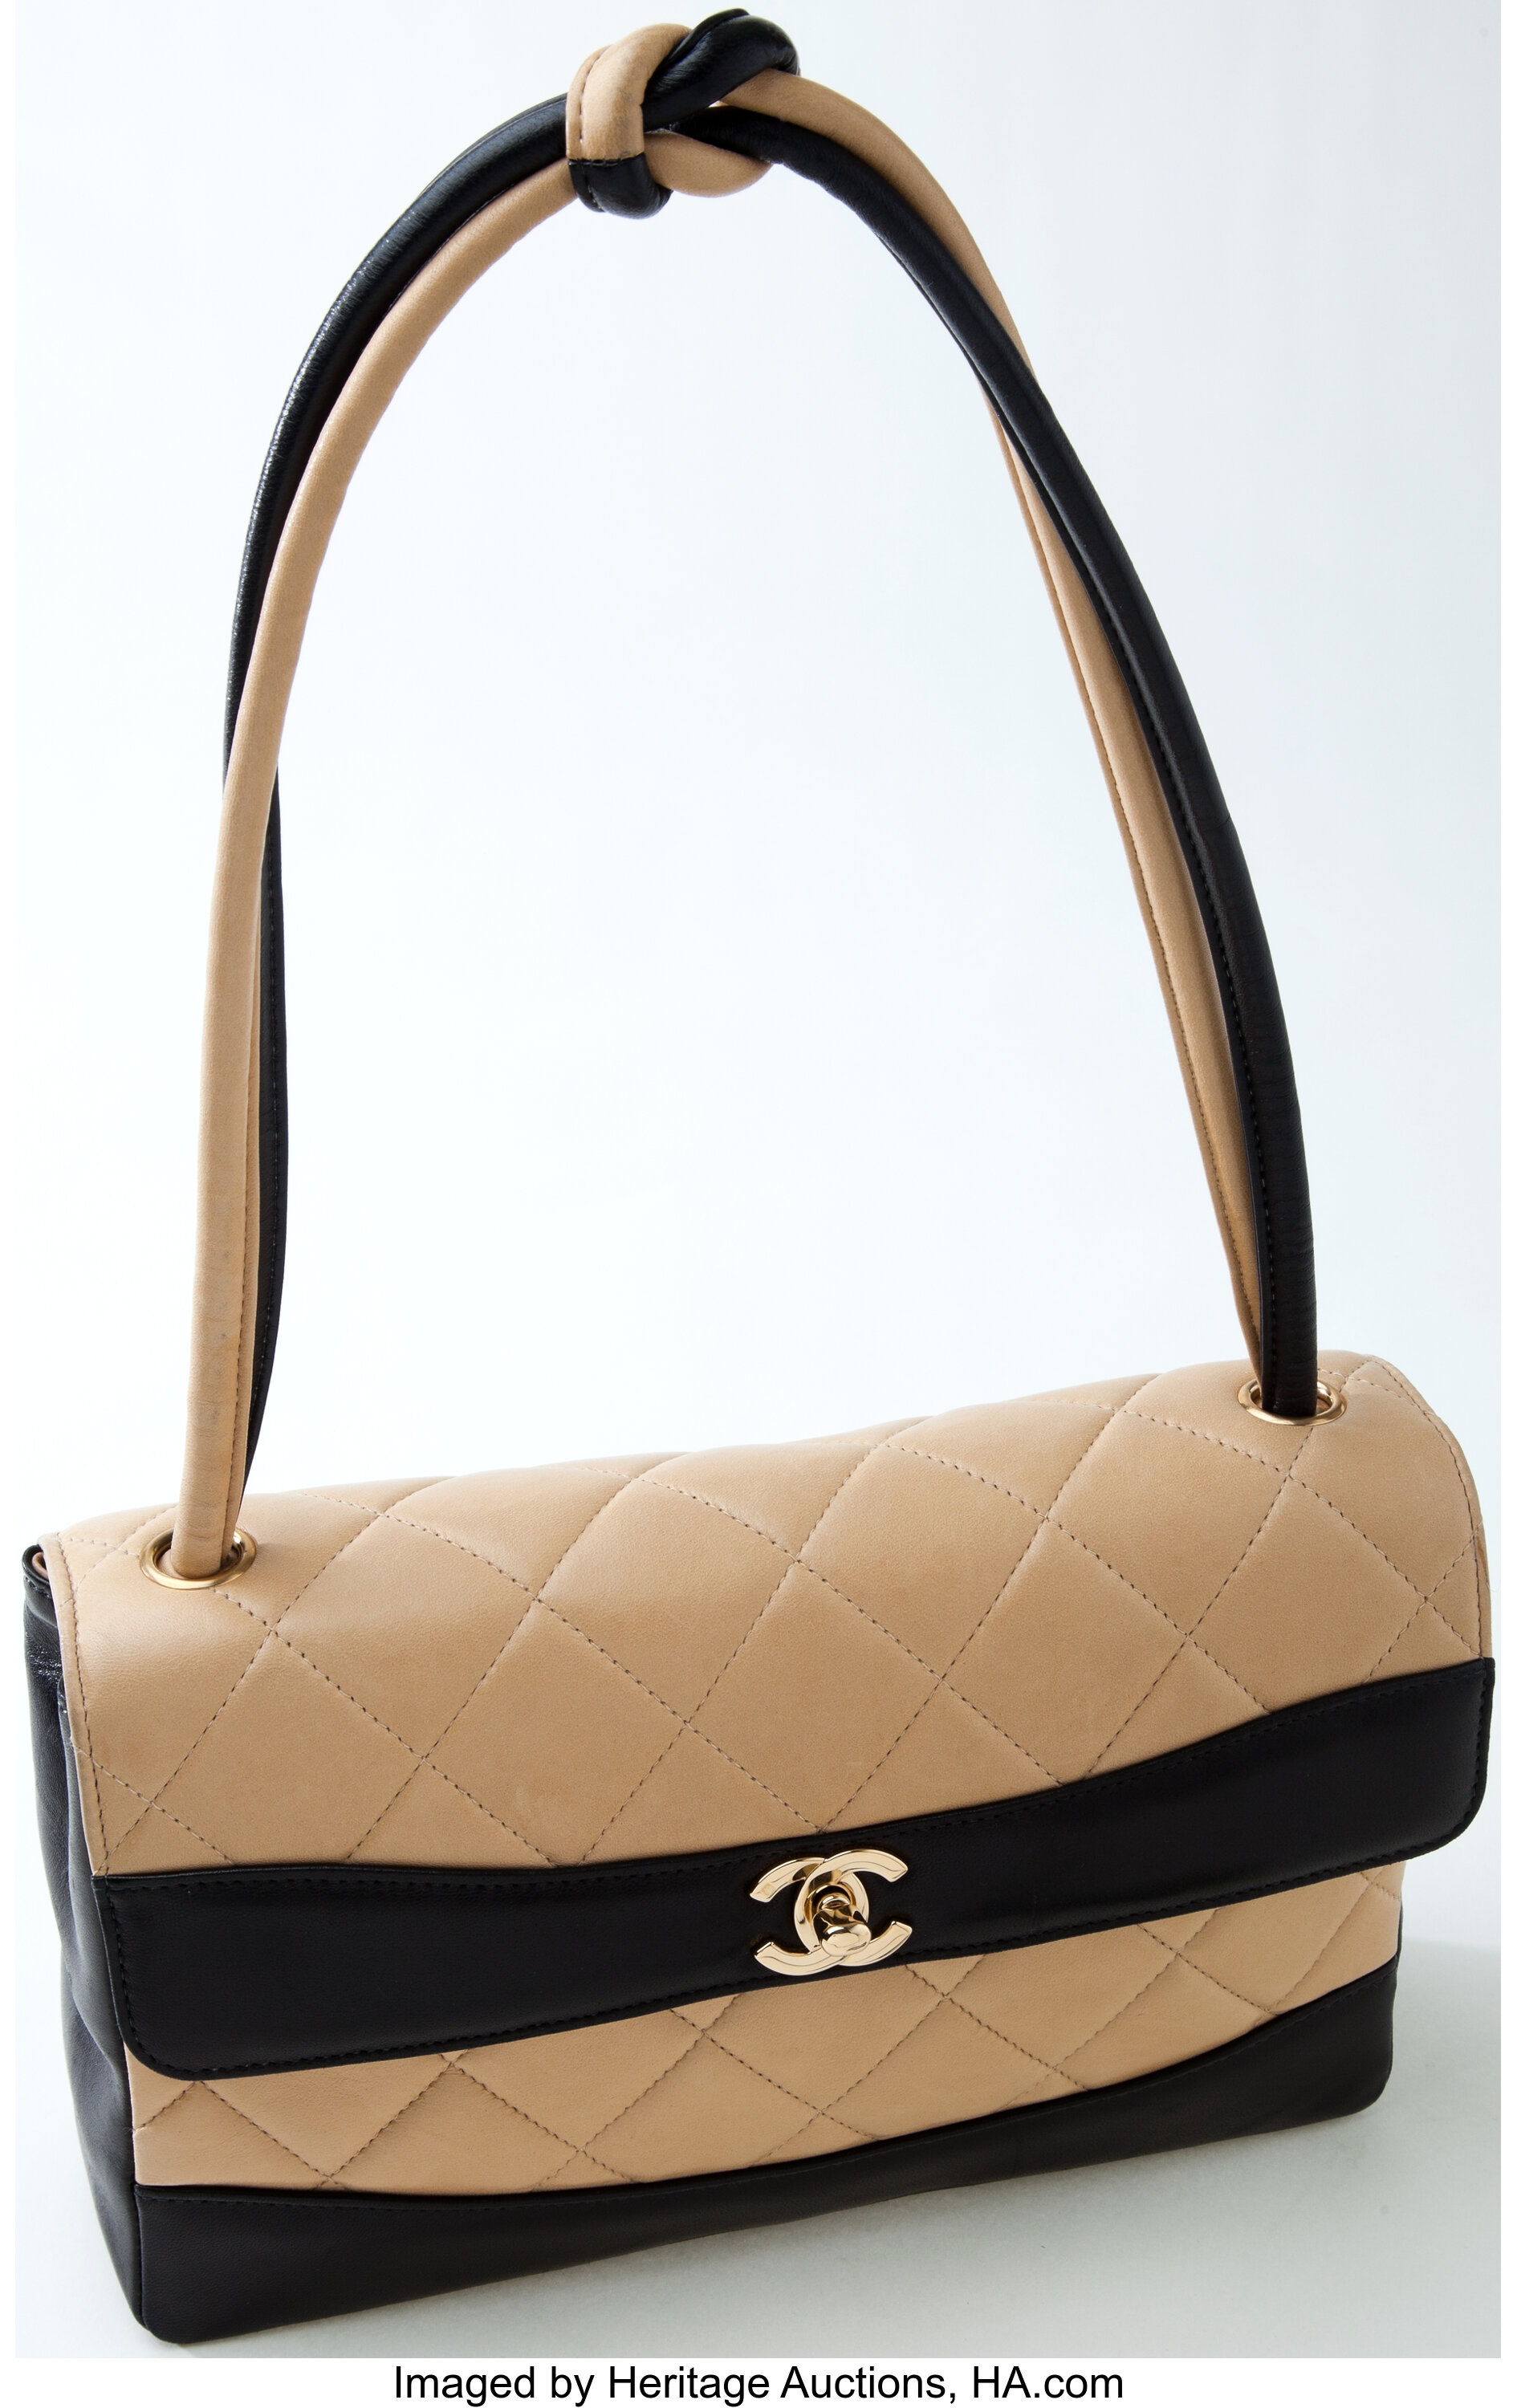 Heritage Vintage: Chanel Black and Beige Quilted Lambskin Leather